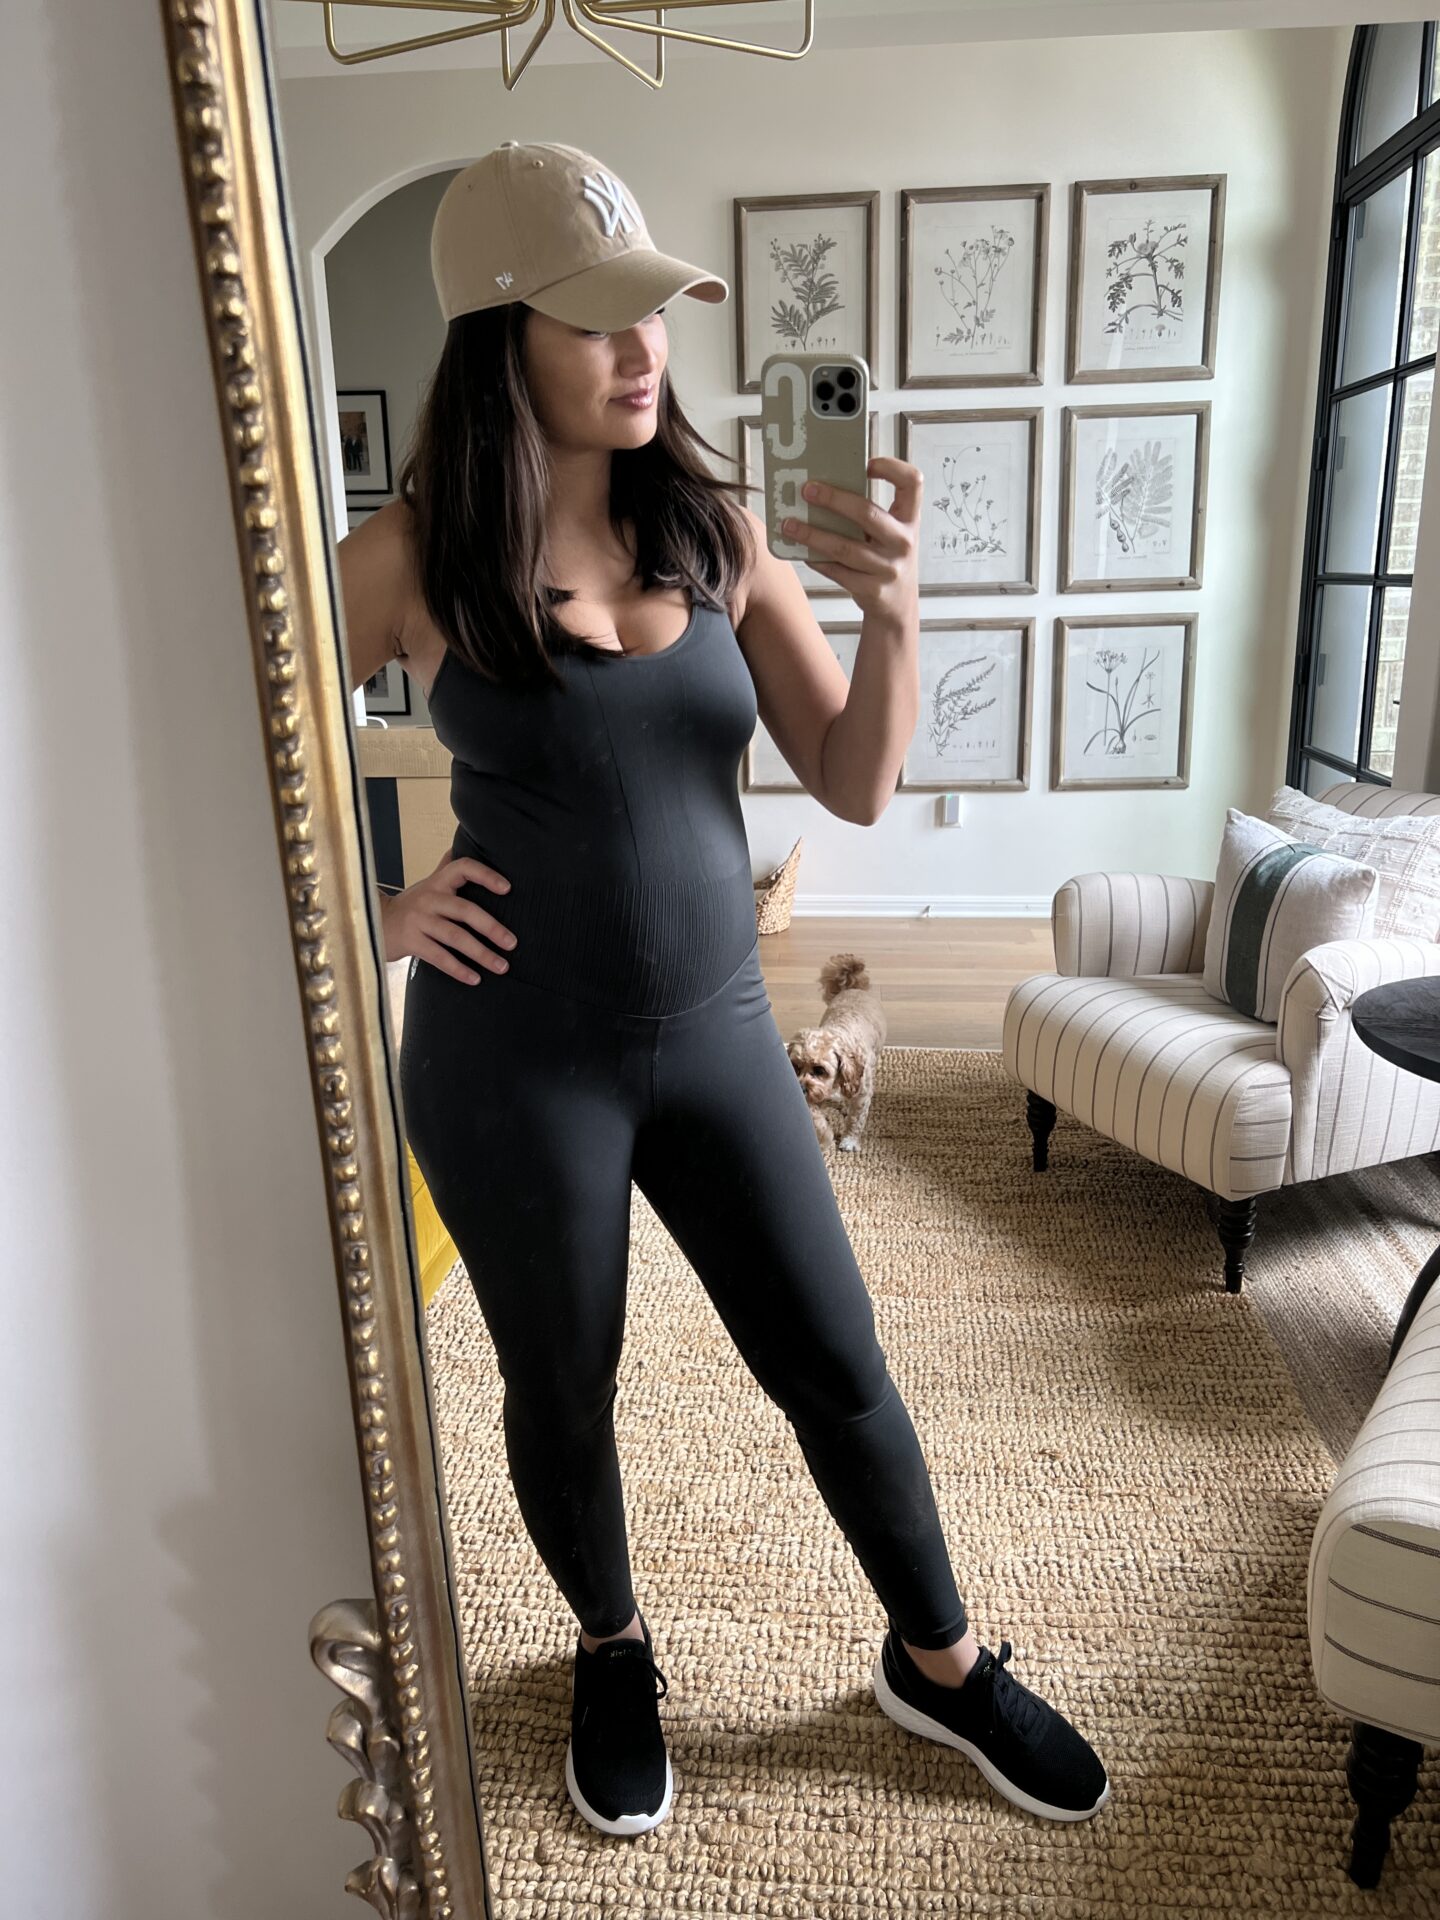 My Most Worn Postpartum Outfits – One Month After Having A Baby - with love  caila